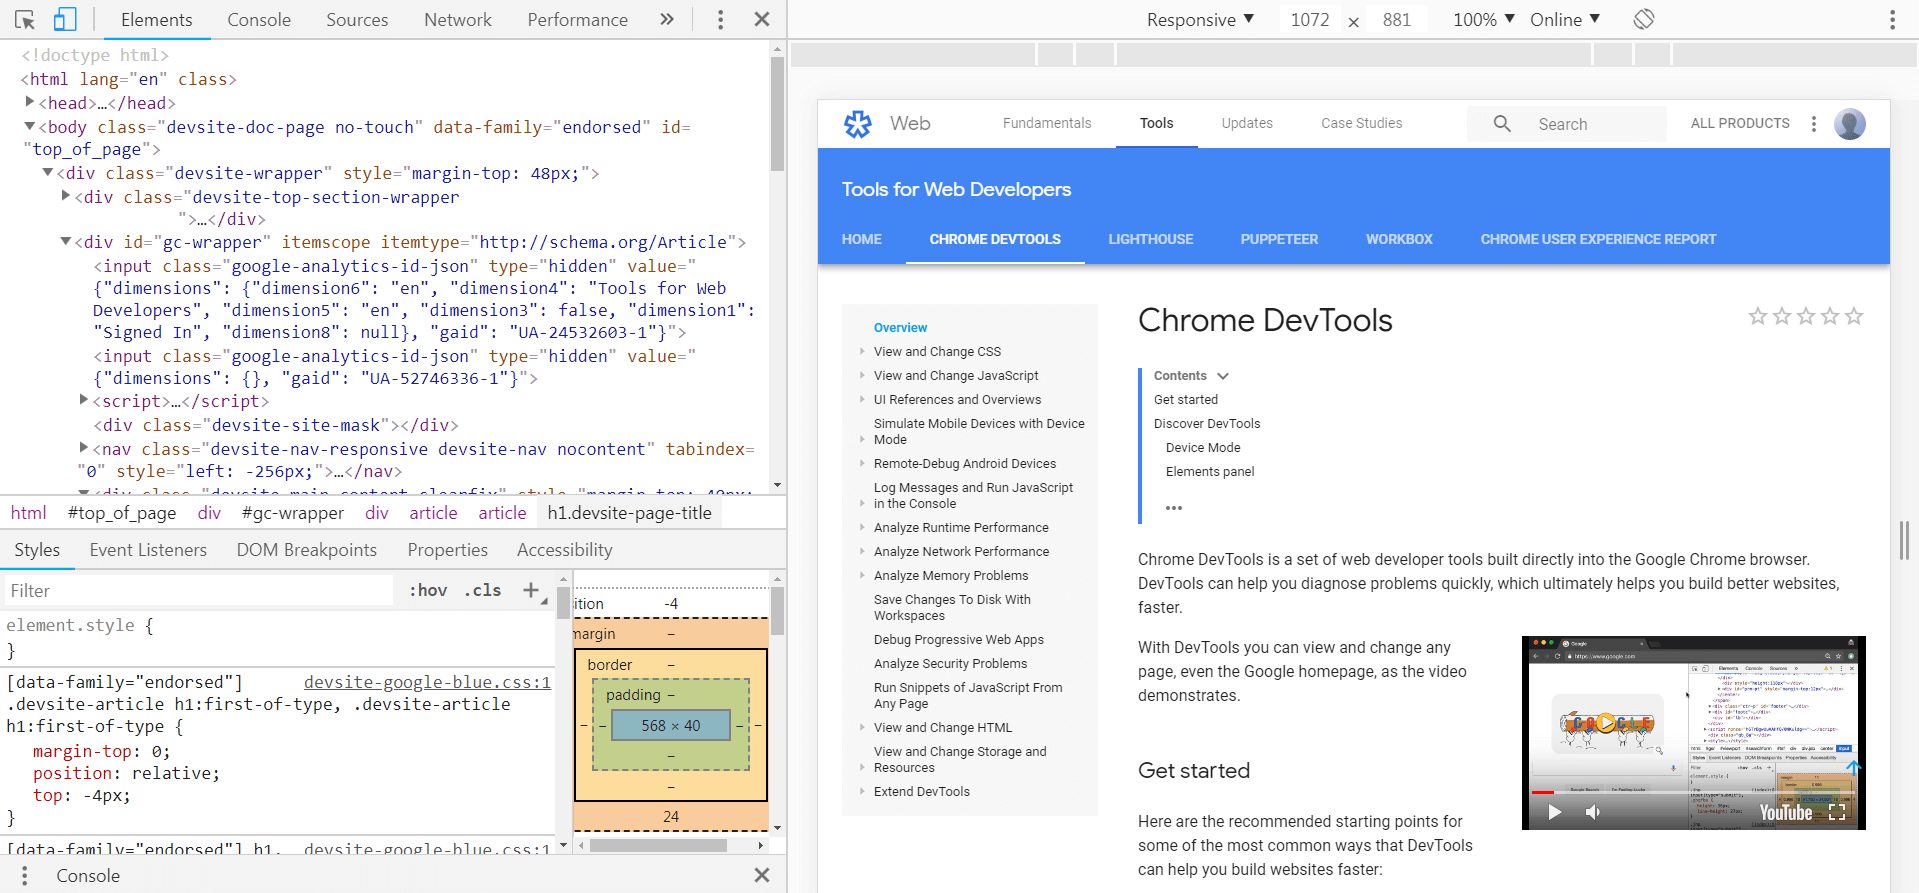 An example of Chrome DevTools.